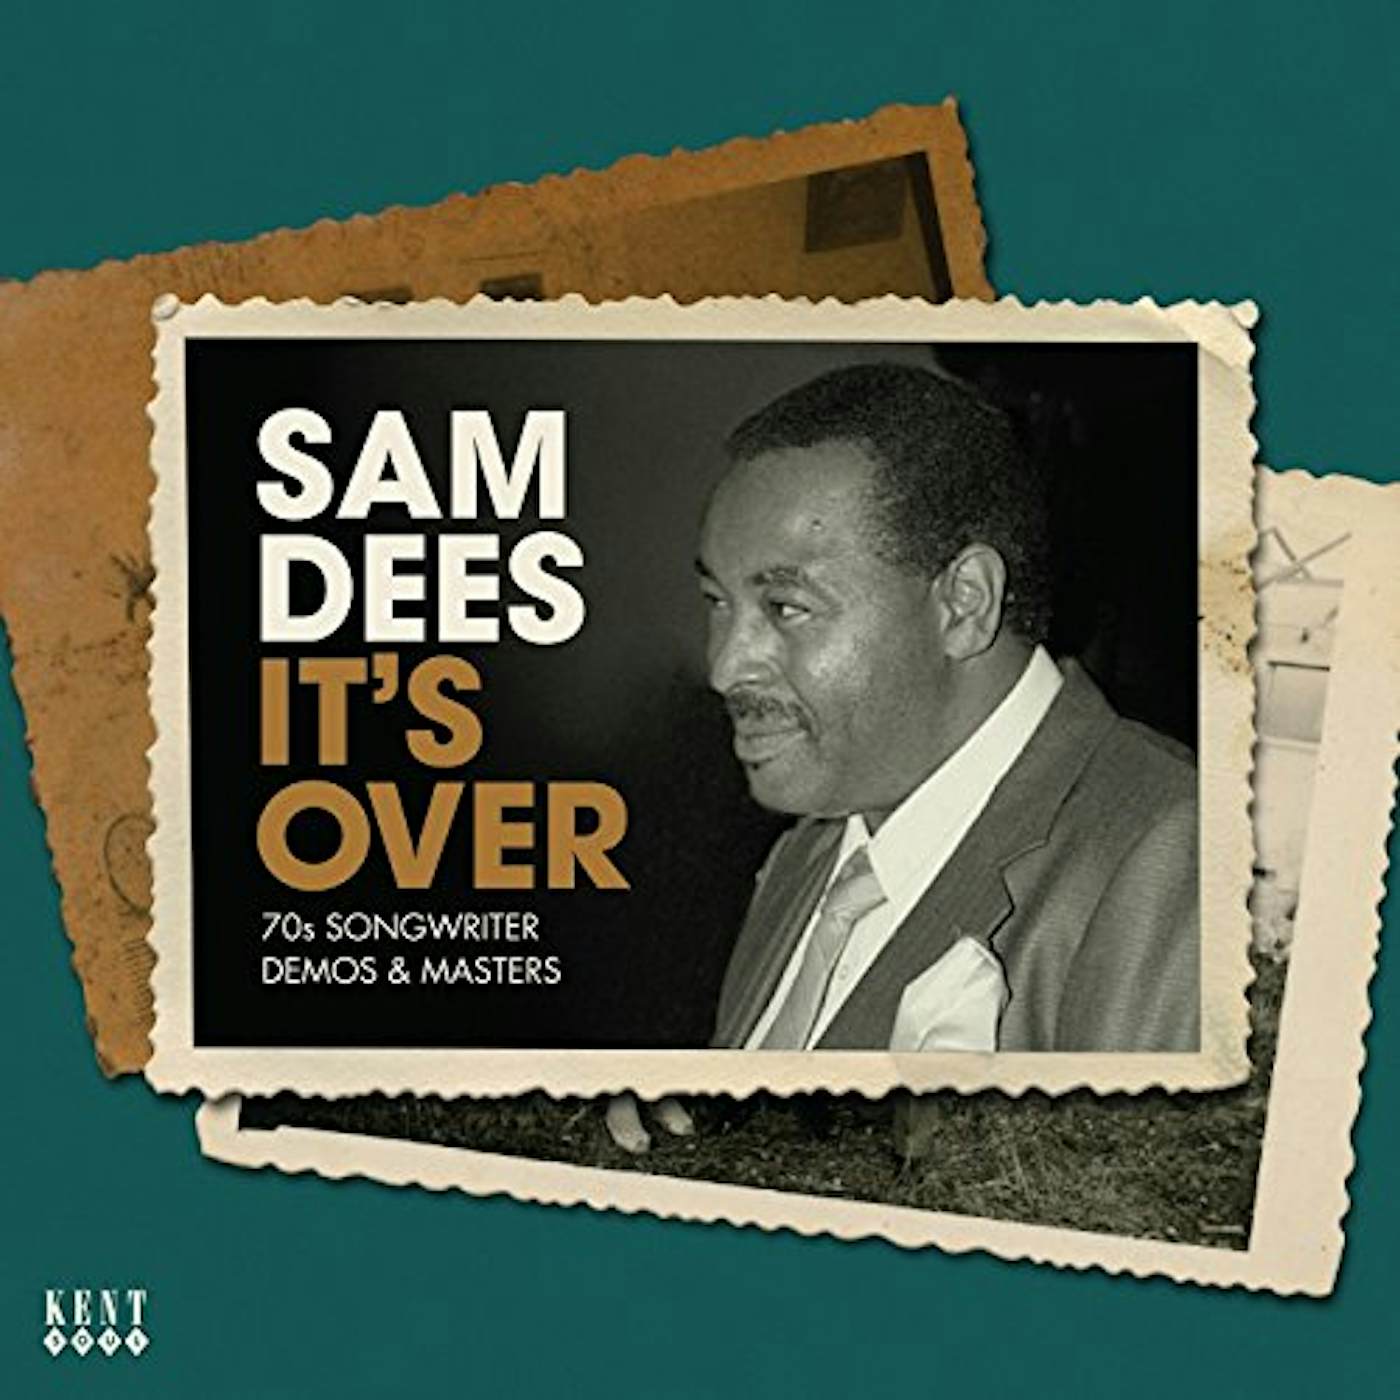 Sam Dees IT'S OVER: 70S SONGWRITER DEMOS & MASTERS CD